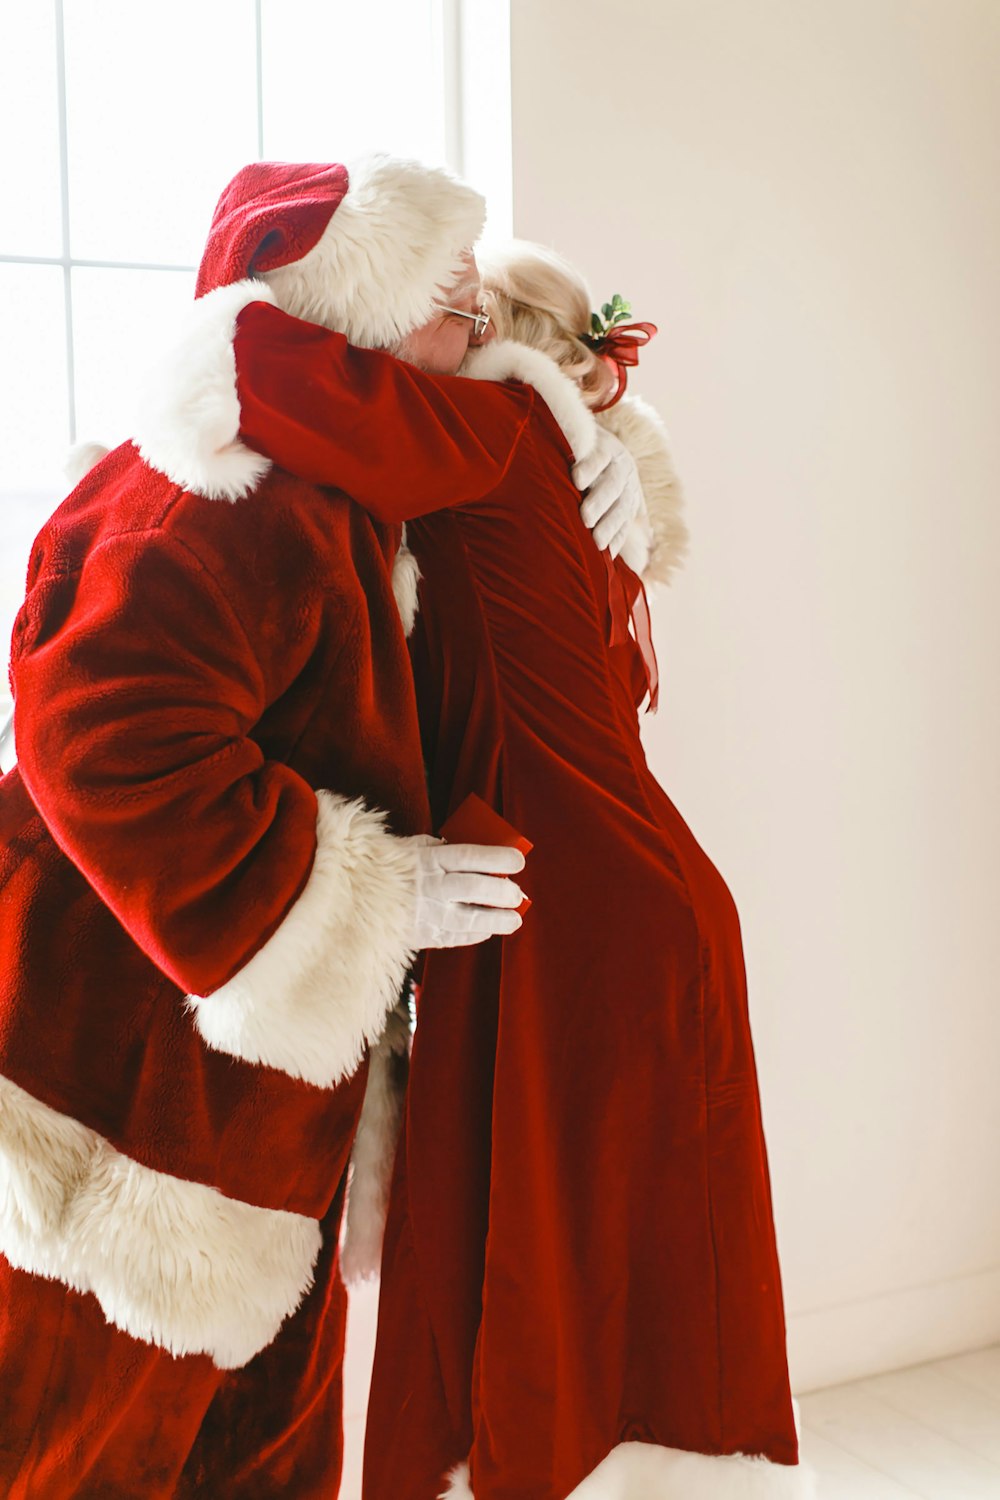 a man in a santa suit hugging a woman